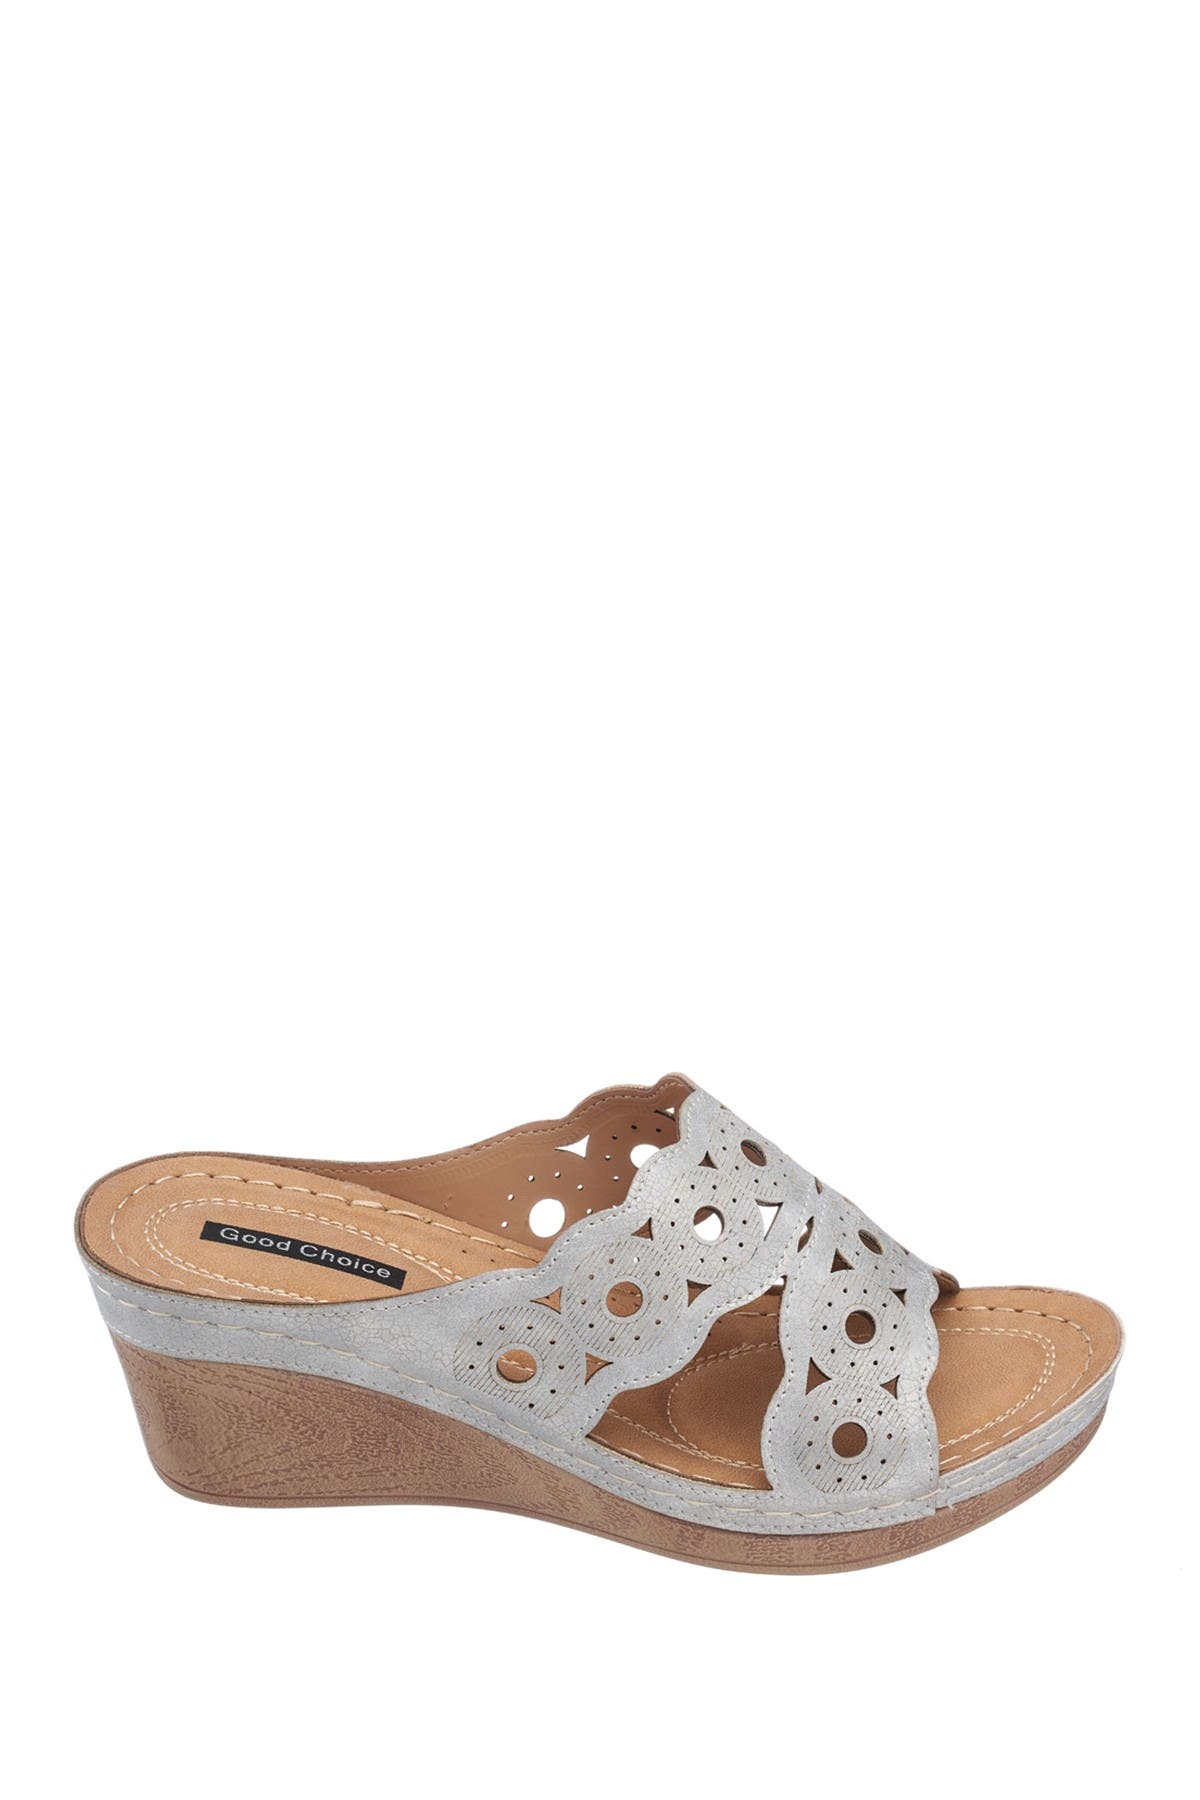 Good Choice New York April Wedge Sandal In Silver